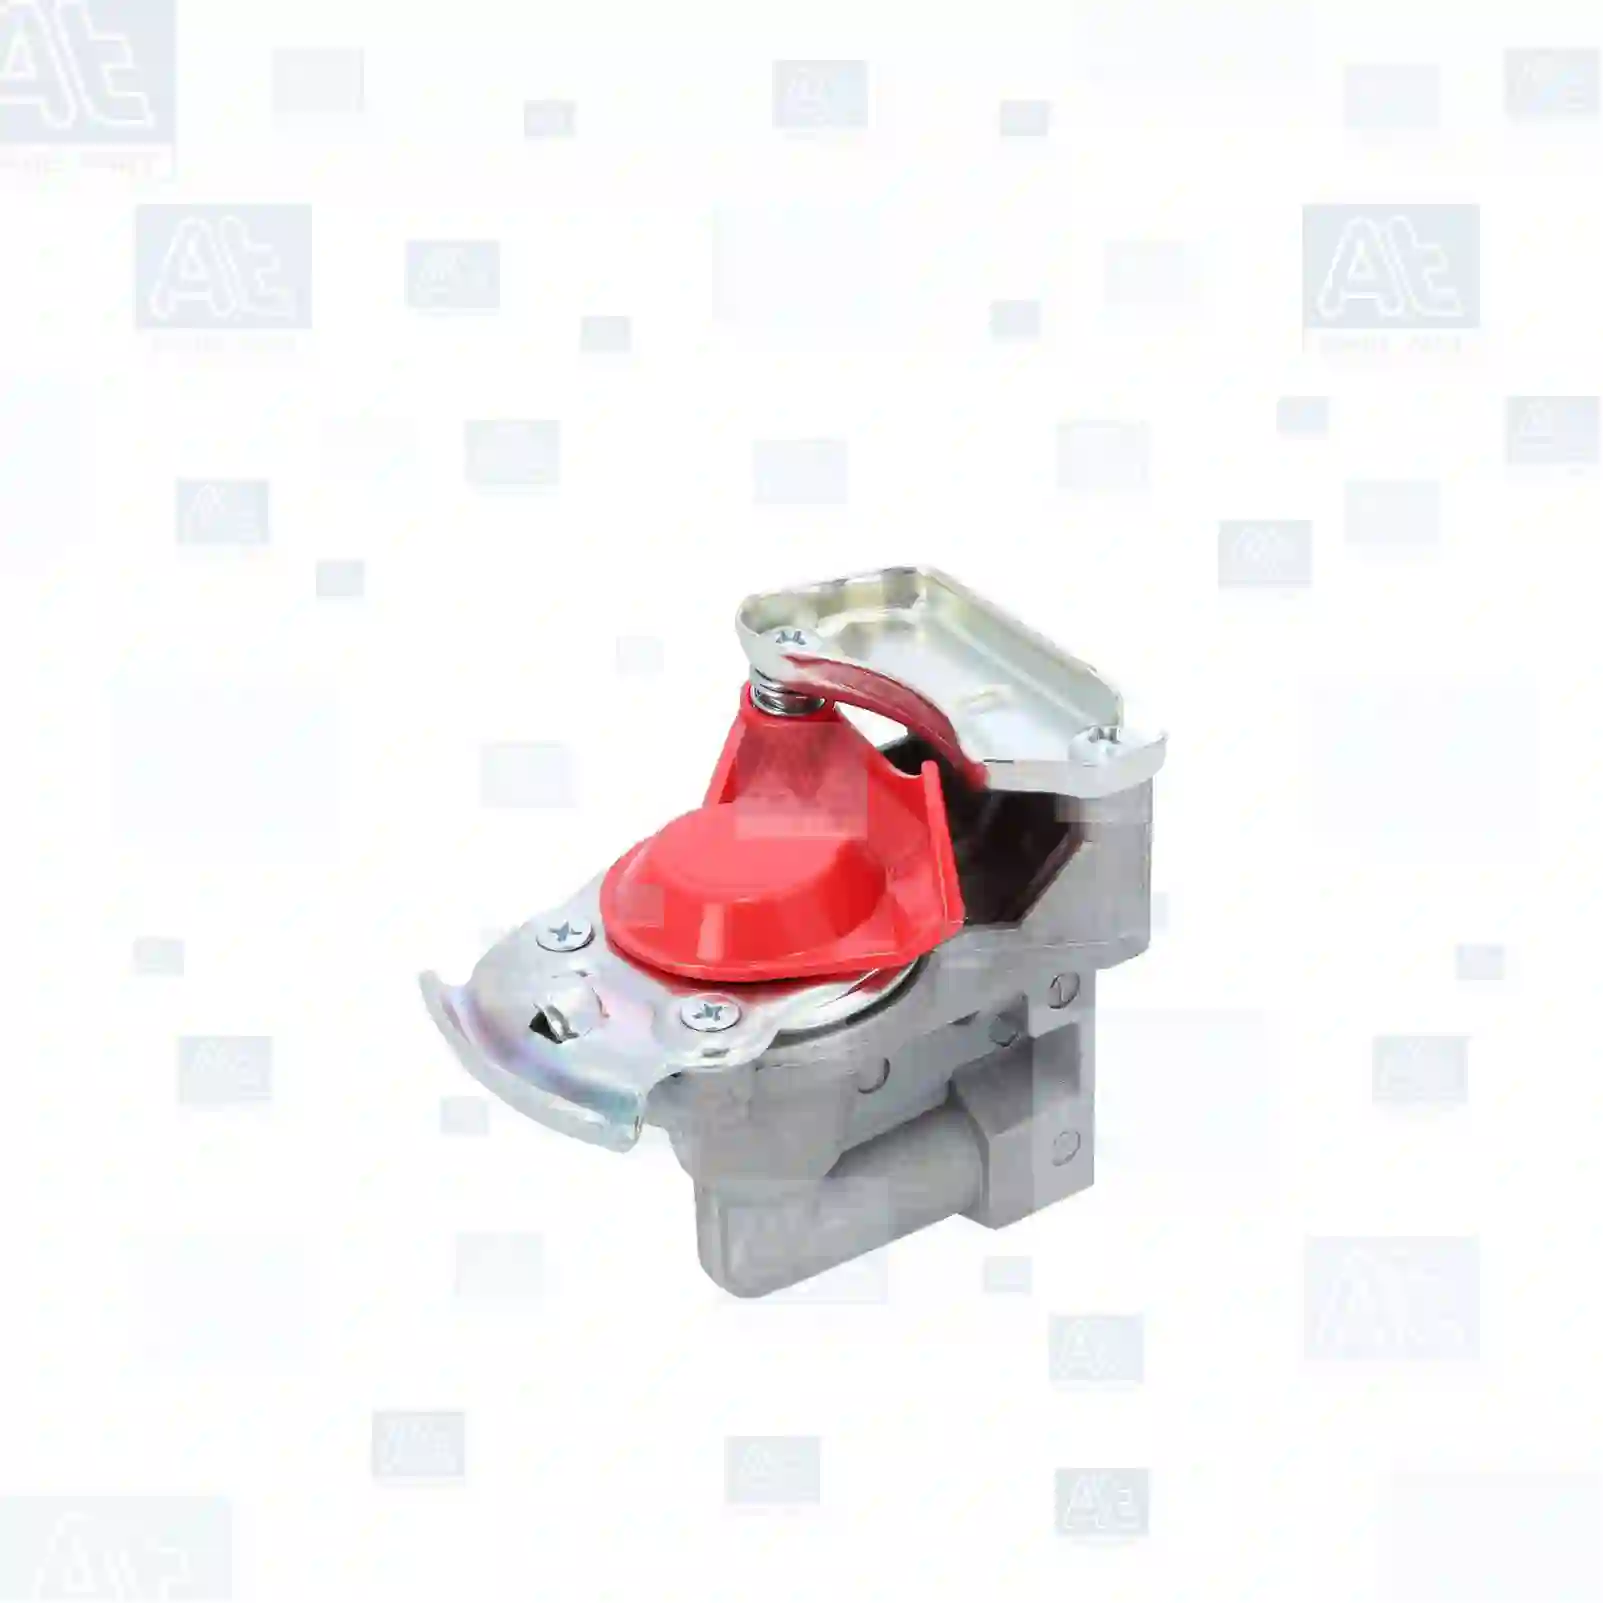 Palm coupling, red lid, at no 77724866, oem no: 0031062, 1505130, 31062, 02515298, 02515436, 02516898, 02521369, 04323303, 04715226, 04841035, 42070652, 42088851, 504186403, 71005207, 02516792, 02516808, 02516902, 02521371, 04463725, 04463735, 2516792, 2516808, 2516902, 2521371, 42159059, 79429, 502966508, 502966514, 81512206034, 81512206037, 81512206039, 81512206042, 81512206066, 81512206077, 0004293730, 0004294930, 0004295330, 0004296330, 0004297830, 5021170411, 5516017524, 1935532, 8283987000, 600607344 At Spare Part | Engine, Accelerator Pedal, Camshaft, Connecting Rod, Crankcase, Crankshaft, Cylinder Head, Engine Suspension Mountings, Exhaust Manifold, Exhaust Gas Recirculation, Filter Kits, Flywheel Housing, General Overhaul Kits, Engine, Intake Manifold, Oil Cleaner, Oil Cooler, Oil Filter, Oil Pump, Oil Sump, Piston & Liner, Sensor & Switch, Timing Case, Turbocharger, Cooling System, Belt Tensioner, Coolant Filter, Coolant Pipe, Corrosion Prevention Agent, Drive, Expansion Tank, Fan, Intercooler, Monitors & Gauges, Radiator, Thermostat, V-Belt / Timing belt, Water Pump, Fuel System, Electronical Injector Unit, Feed Pump, Fuel Filter, cpl., Fuel Gauge Sender,  Fuel Line, Fuel Pump, Fuel Tank, Injection Line Kit, Injection Pump, Exhaust System, Clutch & Pedal, Gearbox, Propeller Shaft, Axles, Brake System, Hubs & Wheels, Suspension, Leaf Spring, Universal Parts / Accessories, Steering, Electrical System, Cabin Palm coupling, red lid, at no 77724866, oem no: 0031062, 1505130, 31062, 02515298, 02515436, 02516898, 02521369, 04323303, 04715226, 04841035, 42070652, 42088851, 504186403, 71005207, 02516792, 02516808, 02516902, 02521371, 04463725, 04463735, 2516792, 2516808, 2516902, 2521371, 42159059, 79429, 502966508, 502966514, 81512206034, 81512206037, 81512206039, 81512206042, 81512206066, 81512206077, 0004293730, 0004294930, 0004295330, 0004296330, 0004297830, 5021170411, 5516017524, 1935532, 8283987000, 600607344 At Spare Part | Engine, Accelerator Pedal, Camshaft, Connecting Rod, Crankcase, Crankshaft, Cylinder Head, Engine Suspension Mountings, Exhaust Manifold, Exhaust Gas Recirculation, Filter Kits, Flywheel Housing, General Overhaul Kits, Engine, Intake Manifold, Oil Cleaner, Oil Cooler, Oil Filter, Oil Pump, Oil Sump, Piston & Liner, Sensor & Switch, Timing Case, Turbocharger, Cooling System, Belt Tensioner, Coolant Filter, Coolant Pipe, Corrosion Prevention Agent, Drive, Expansion Tank, Fan, Intercooler, Monitors & Gauges, Radiator, Thermostat, V-Belt / Timing belt, Water Pump, Fuel System, Electronical Injector Unit, Feed Pump, Fuel Filter, cpl., Fuel Gauge Sender,  Fuel Line, Fuel Pump, Fuel Tank, Injection Line Kit, Injection Pump, Exhaust System, Clutch & Pedal, Gearbox, Propeller Shaft, Axles, Brake System, Hubs & Wheels, Suspension, Leaf Spring, Universal Parts / Accessories, Steering, Electrical System, Cabin